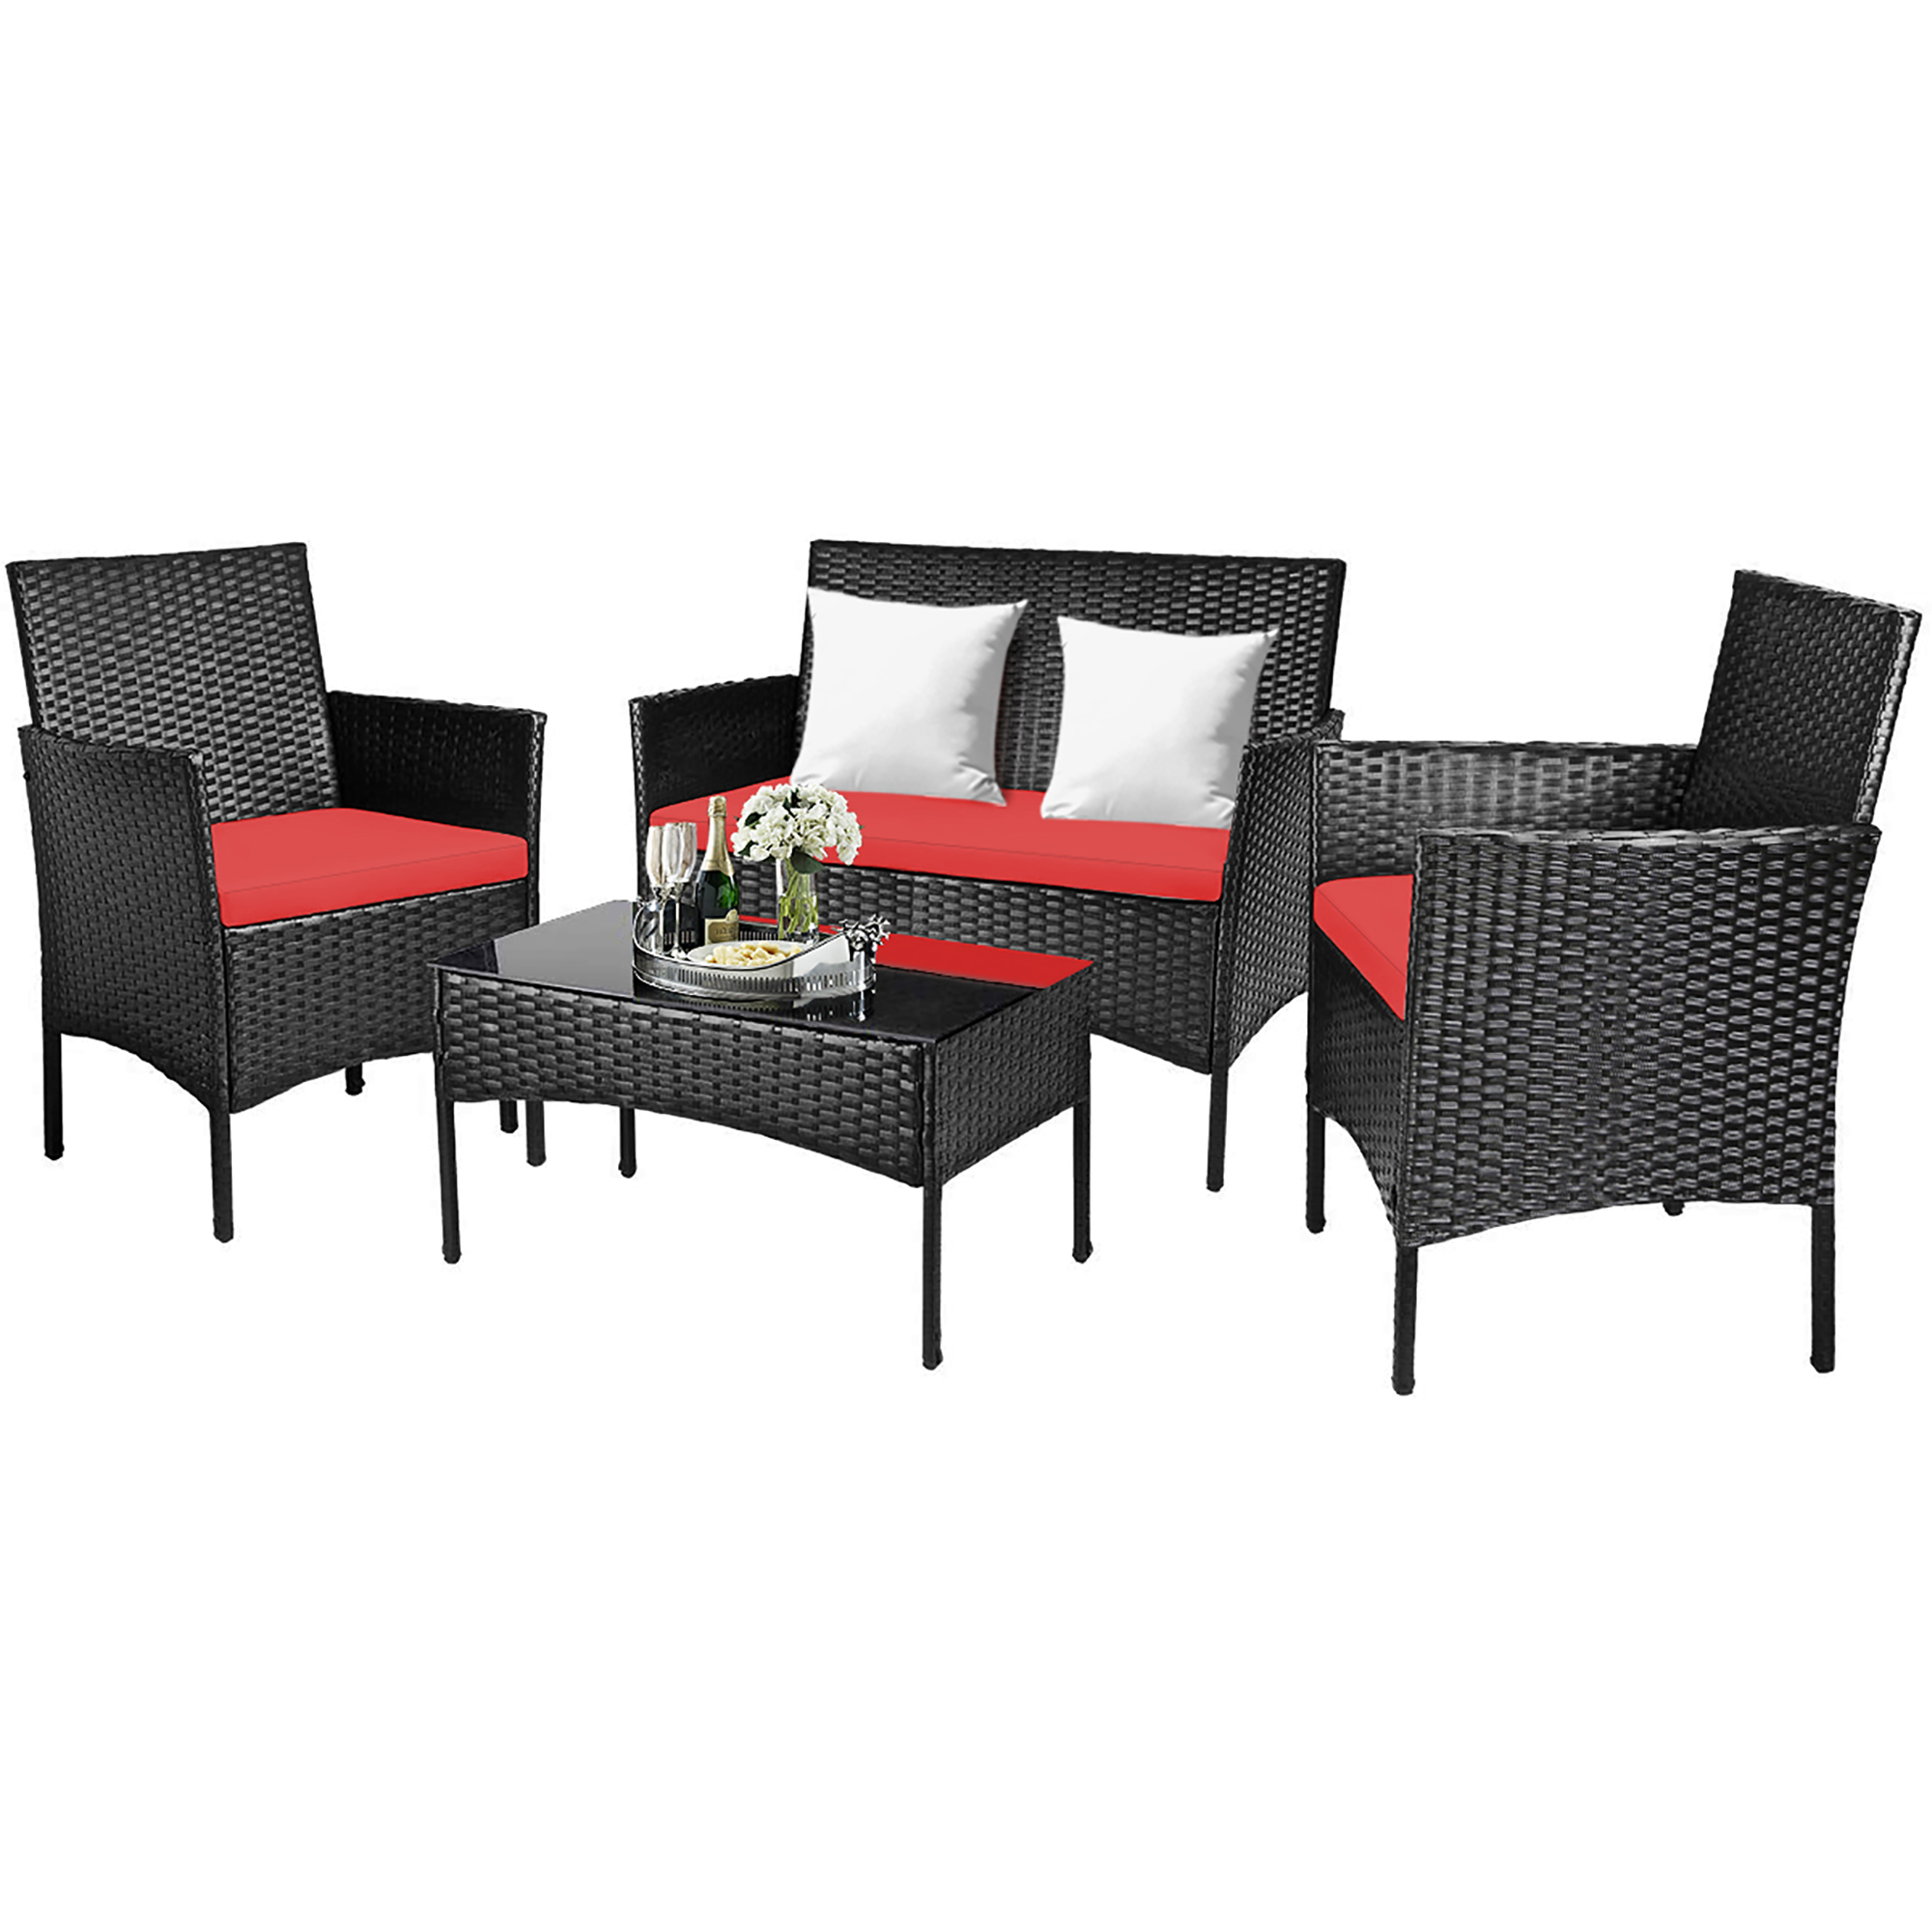 Costway 4PCS Rattan Patio Furniture Set Cushioned Sofa Chair Coffee Table Red - image 3 of 10